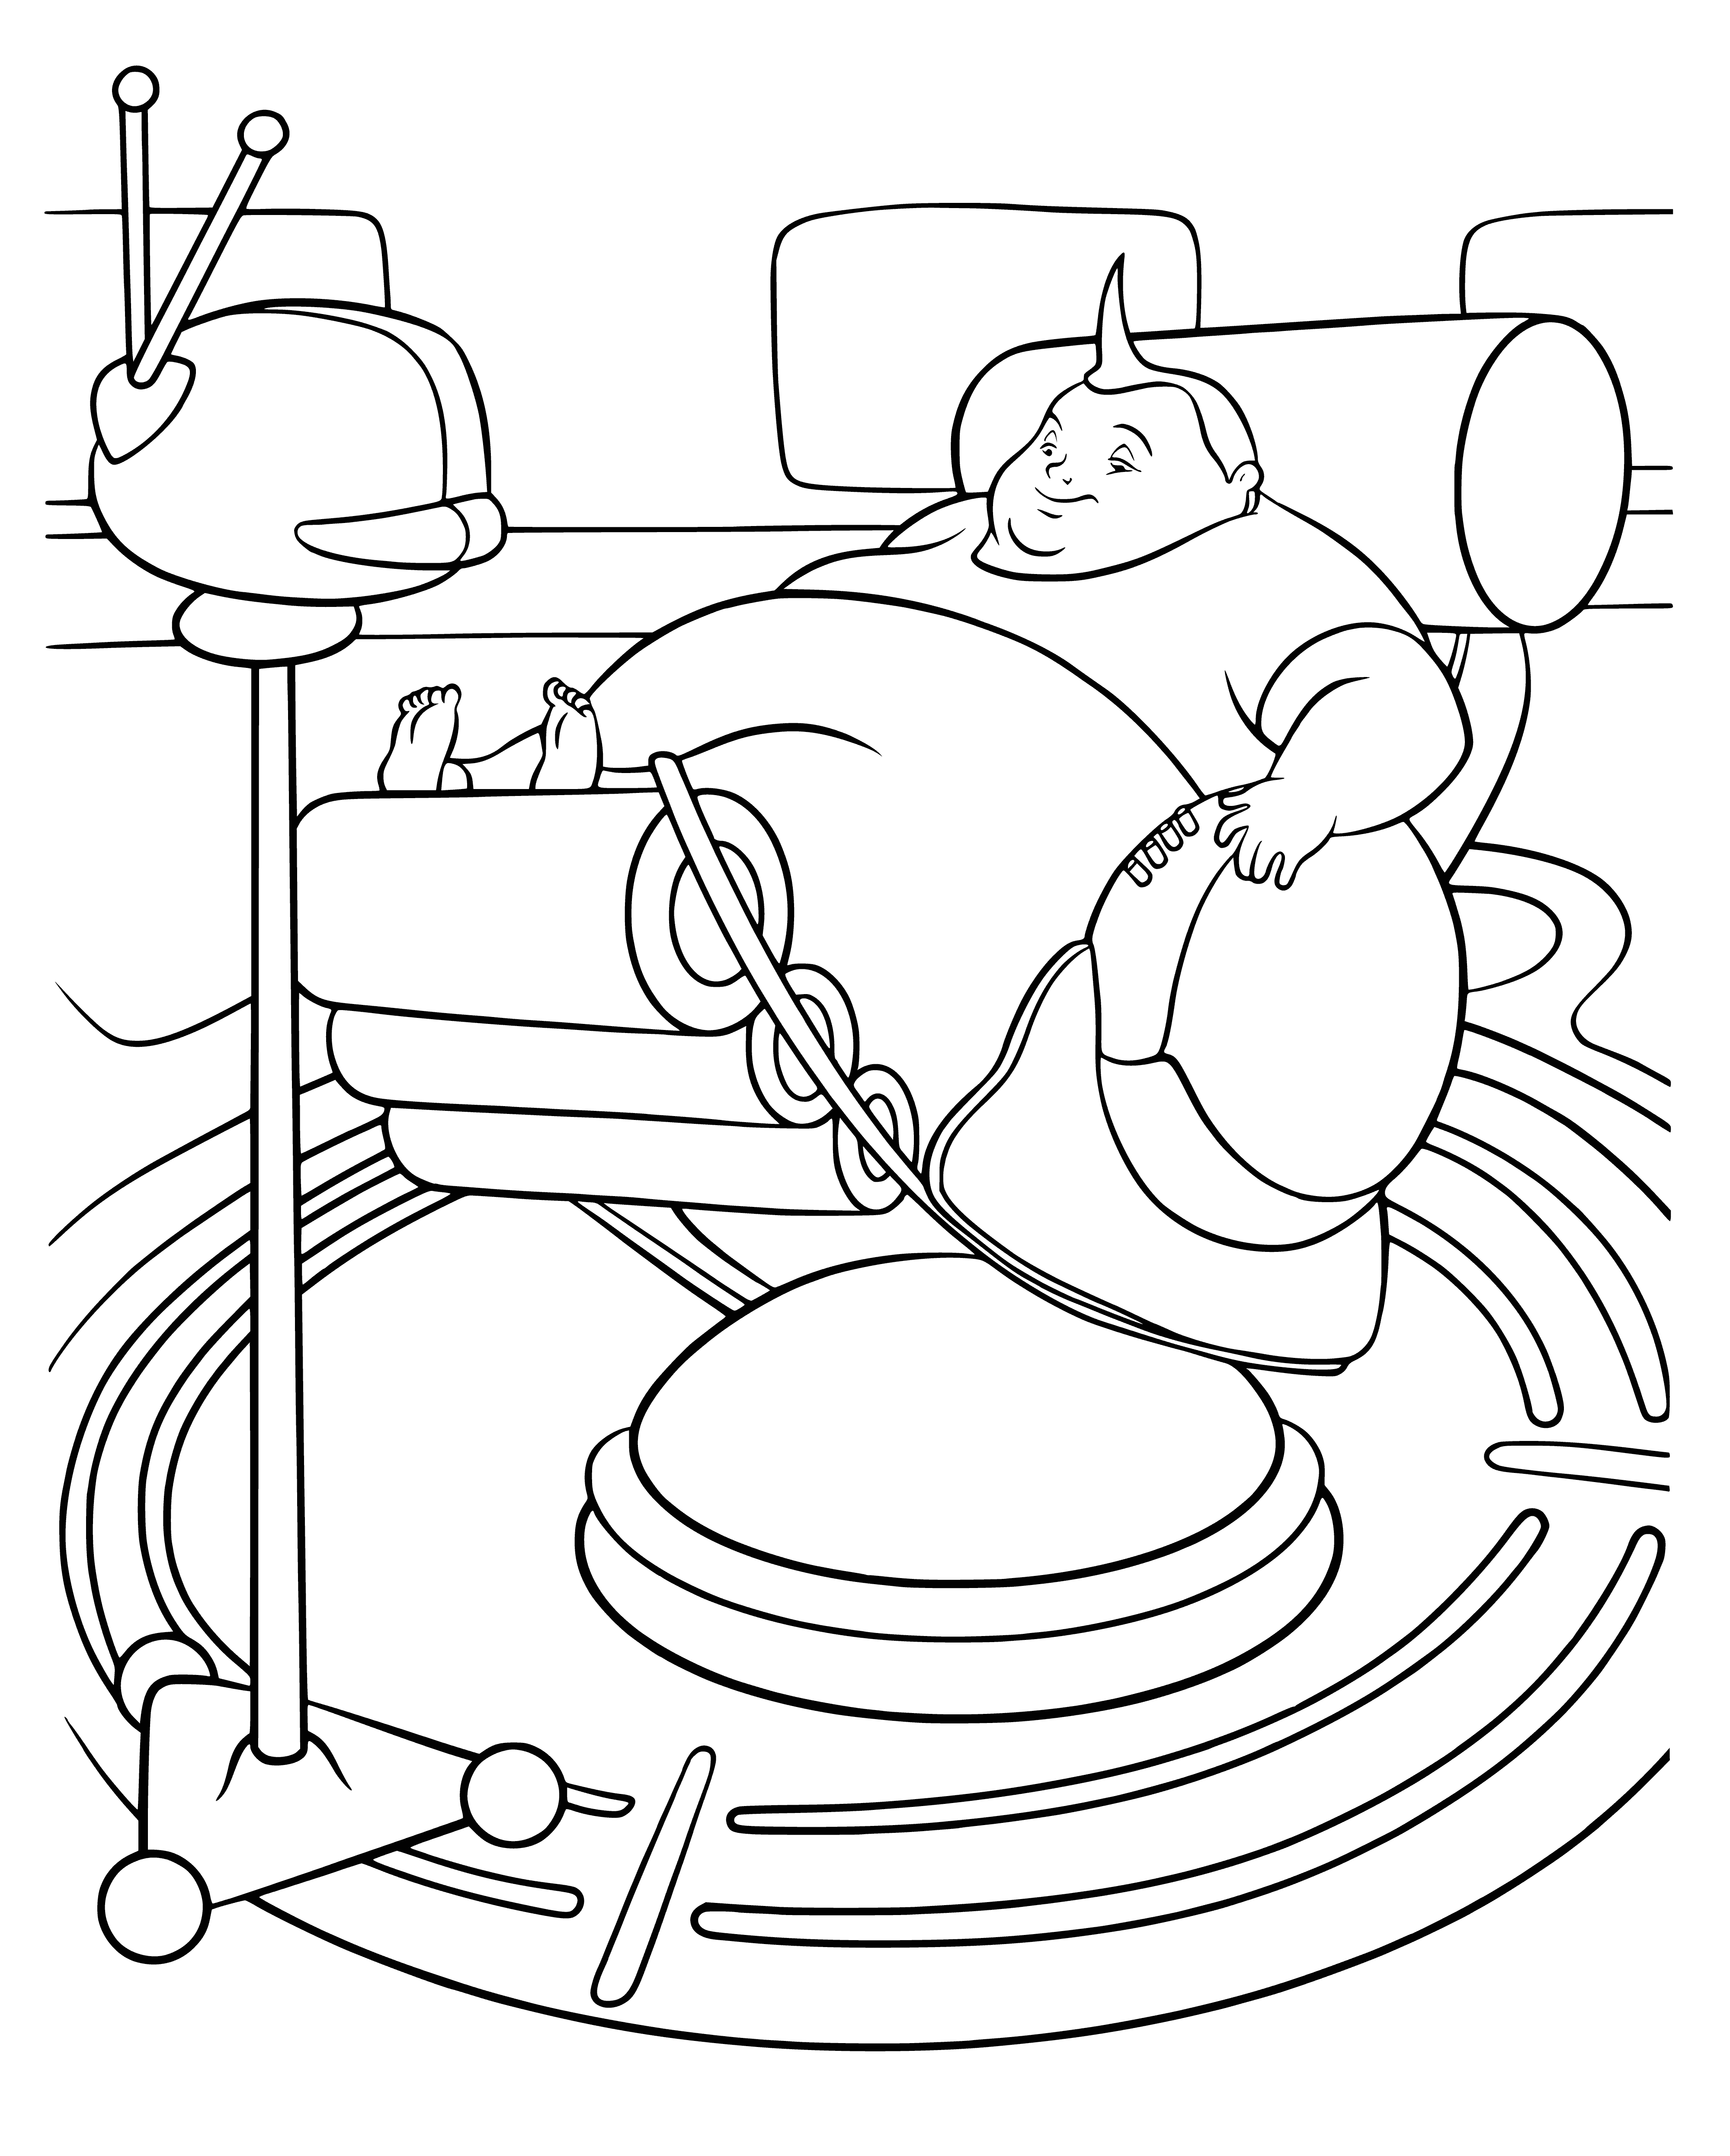 Very fat boy coloring page